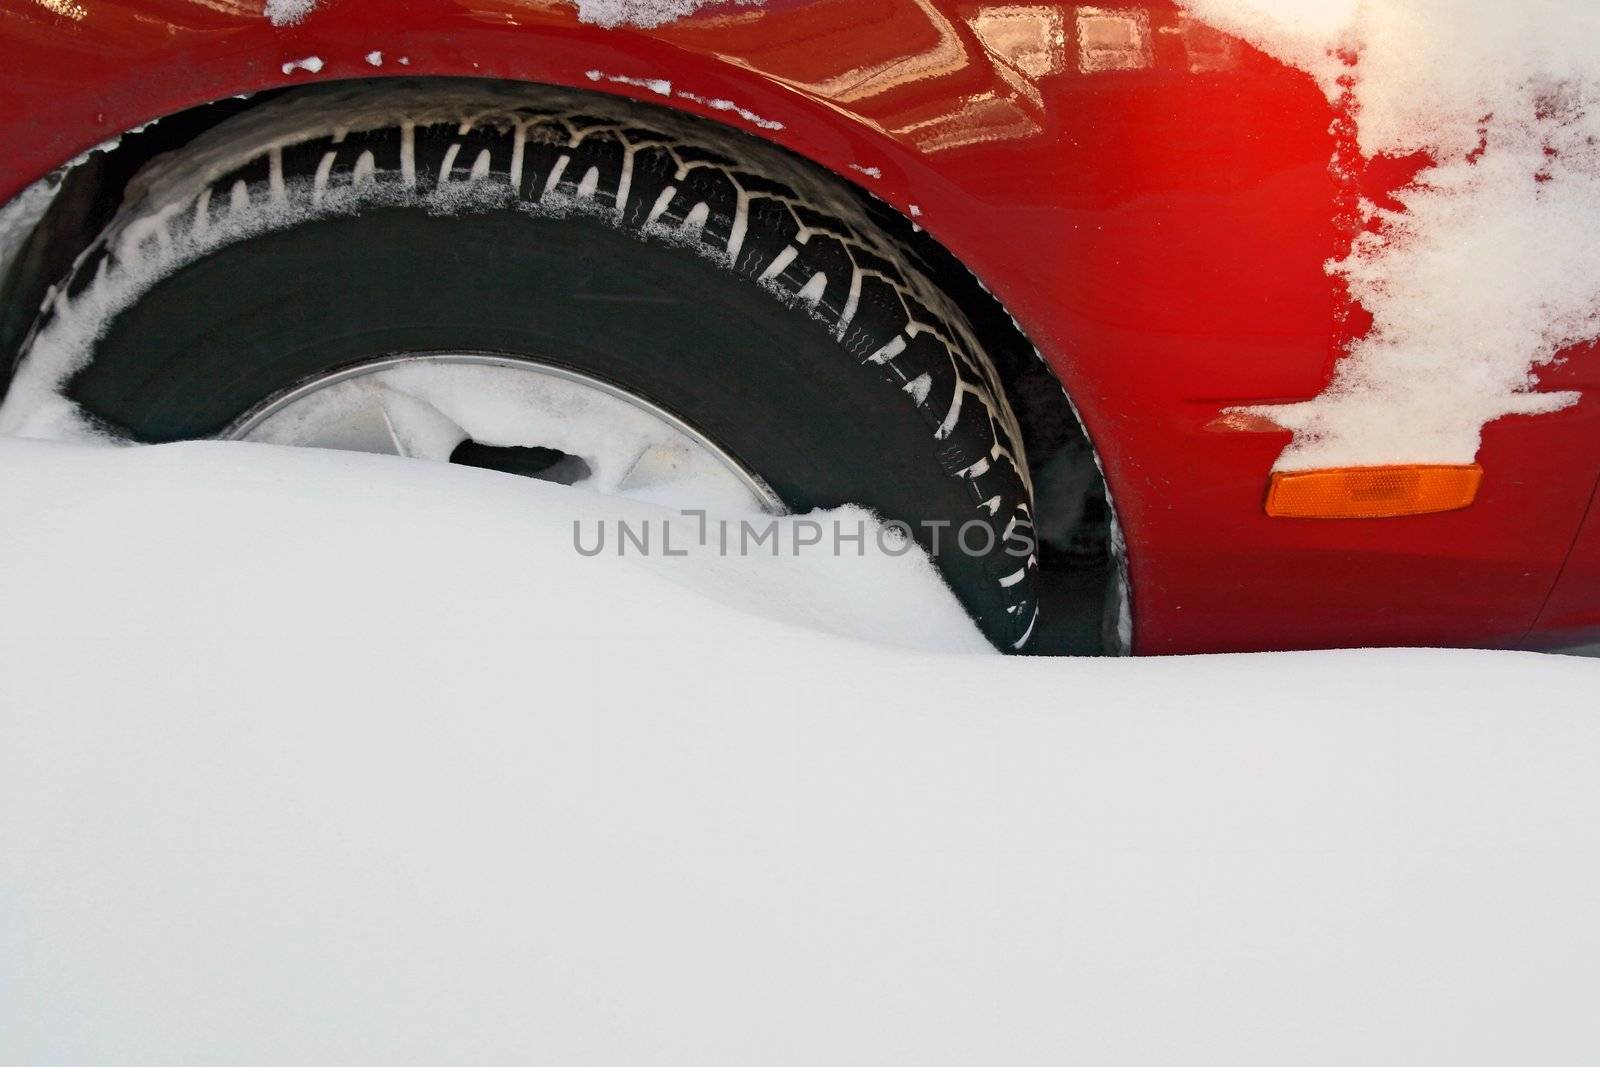 Car wheel stuck in the deep snow after the heavy snowstorm.